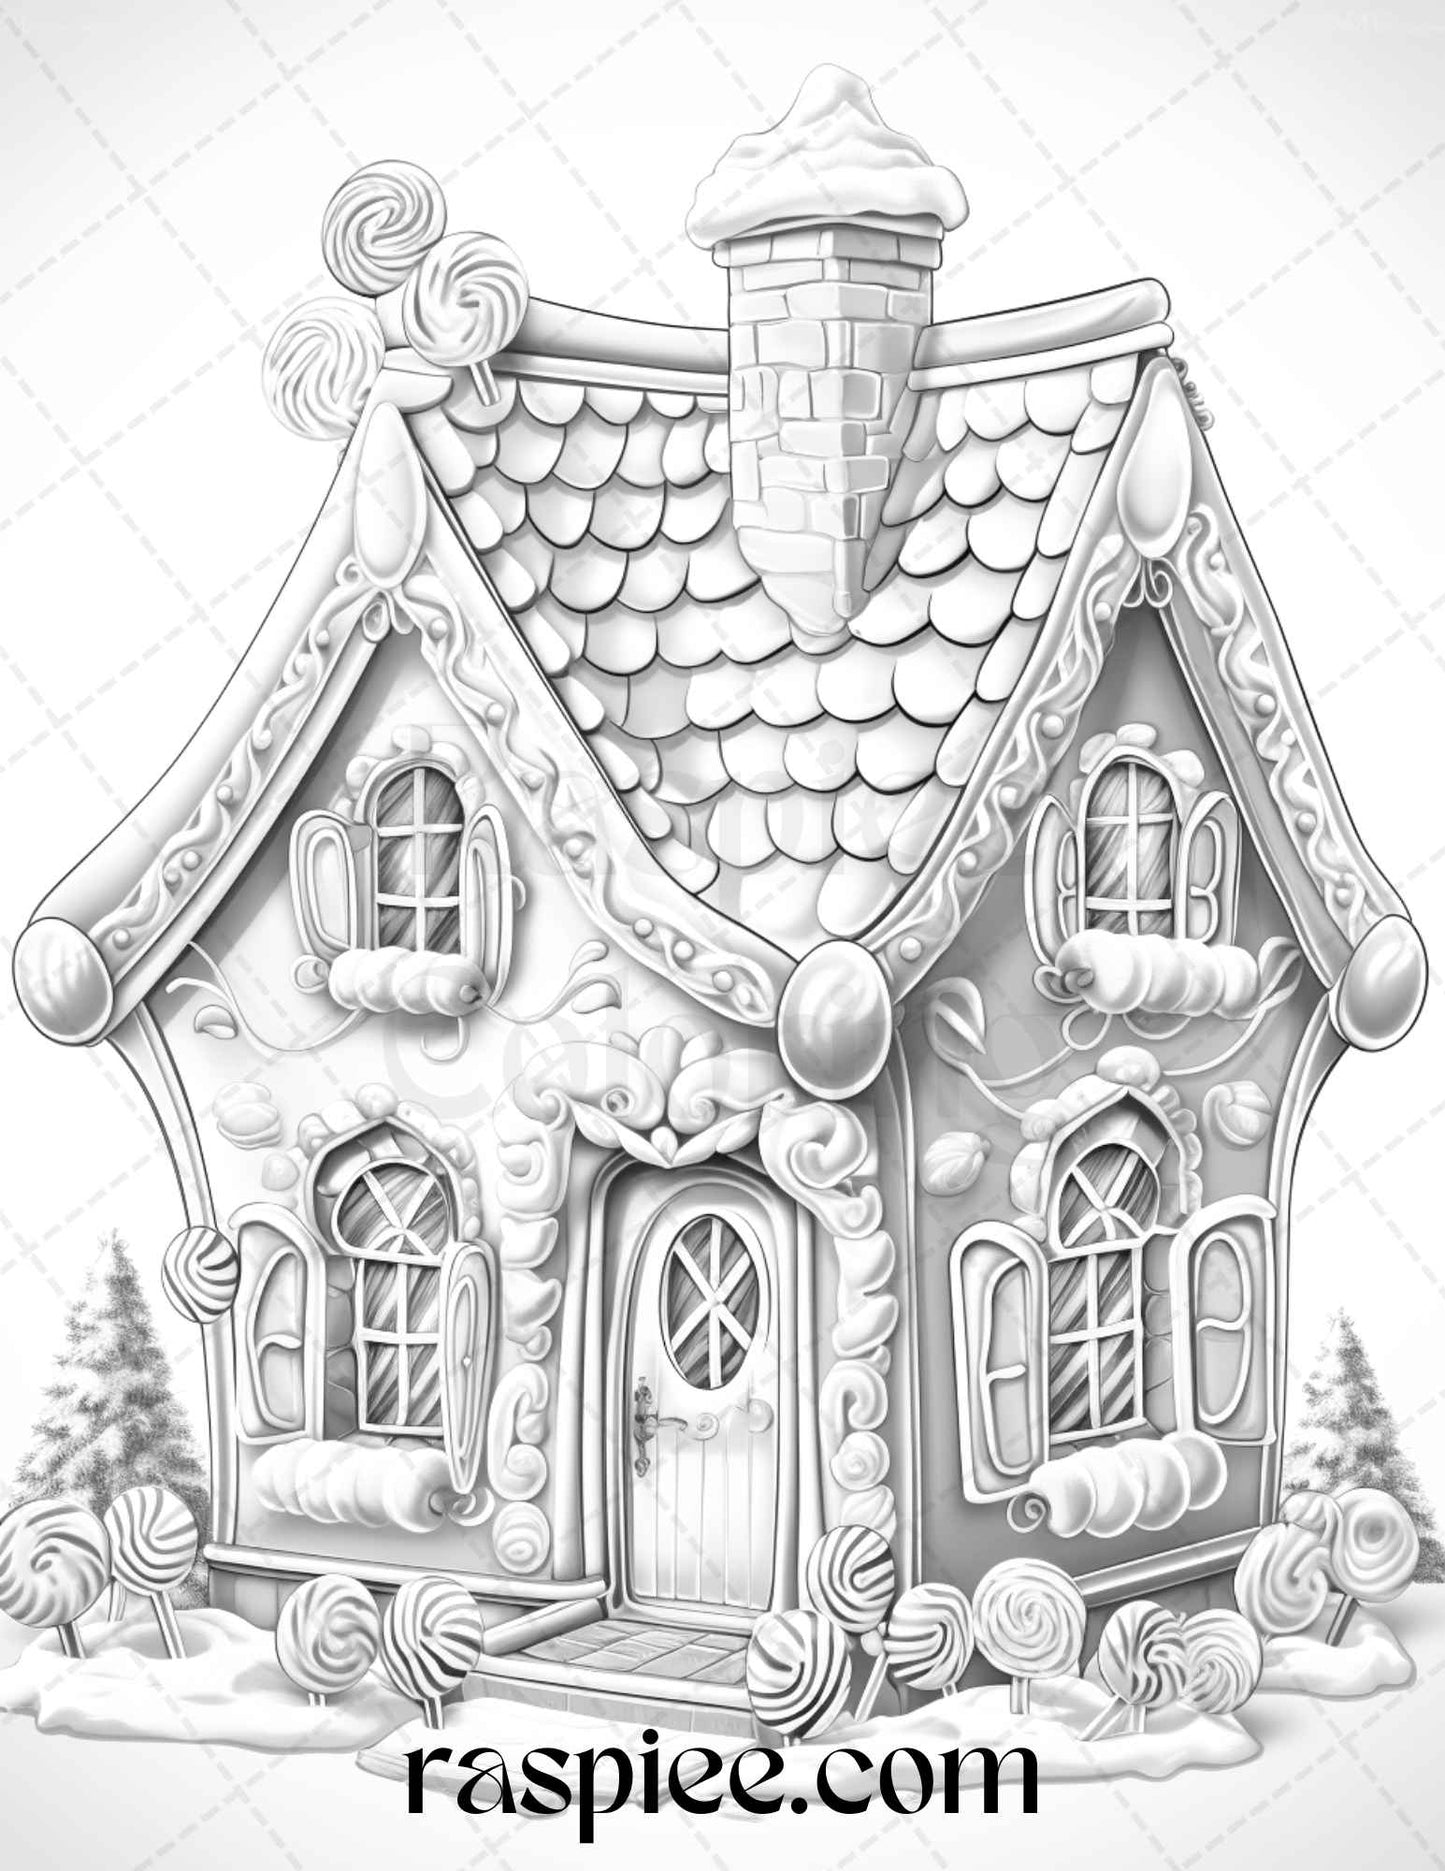 Christmas Gingerbread House Coloring Pages, Printable Coloring Pages for Adults and Kids, Grayscale Coloring Sheets, Instant Download Christmas Coloring Book